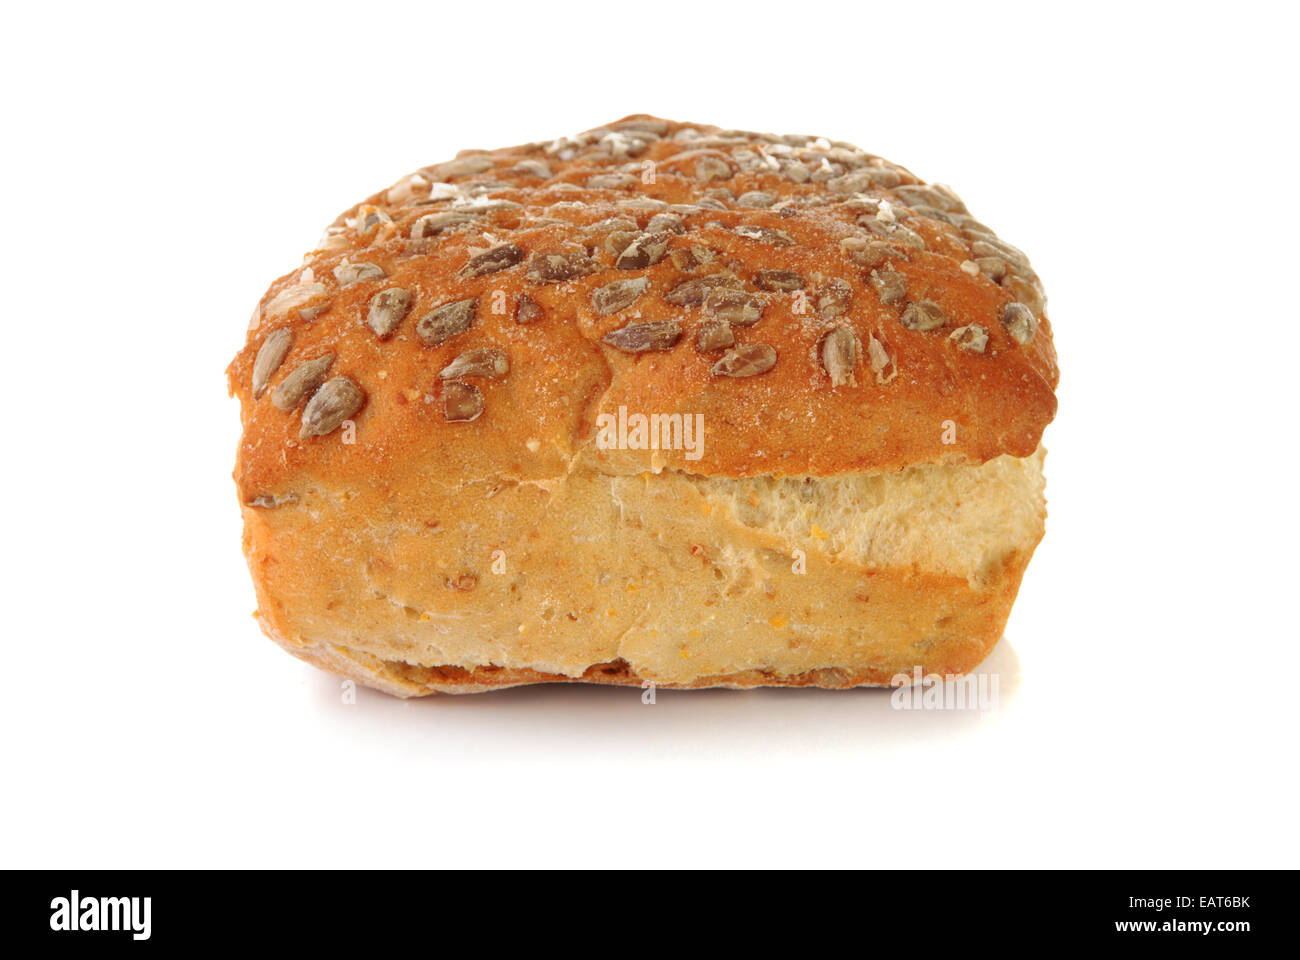 Close-up of a bun with sunflower seeds on white background Stock Photo